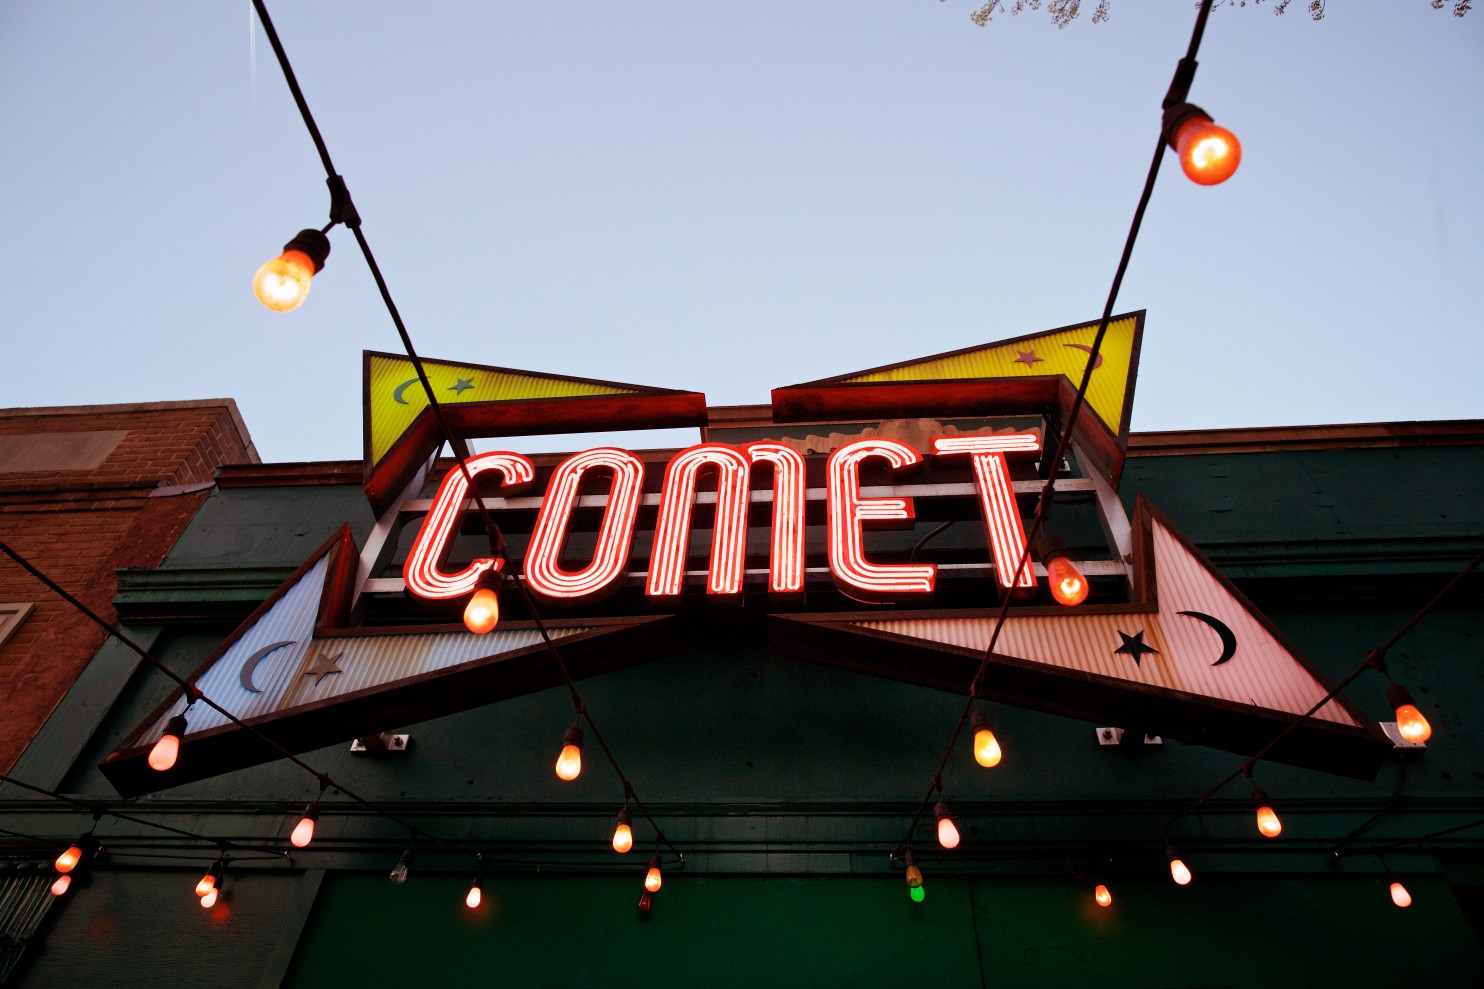 The exterior of Comet Ping Pong in the District. (Deb Lindsey /For The Washington Post)